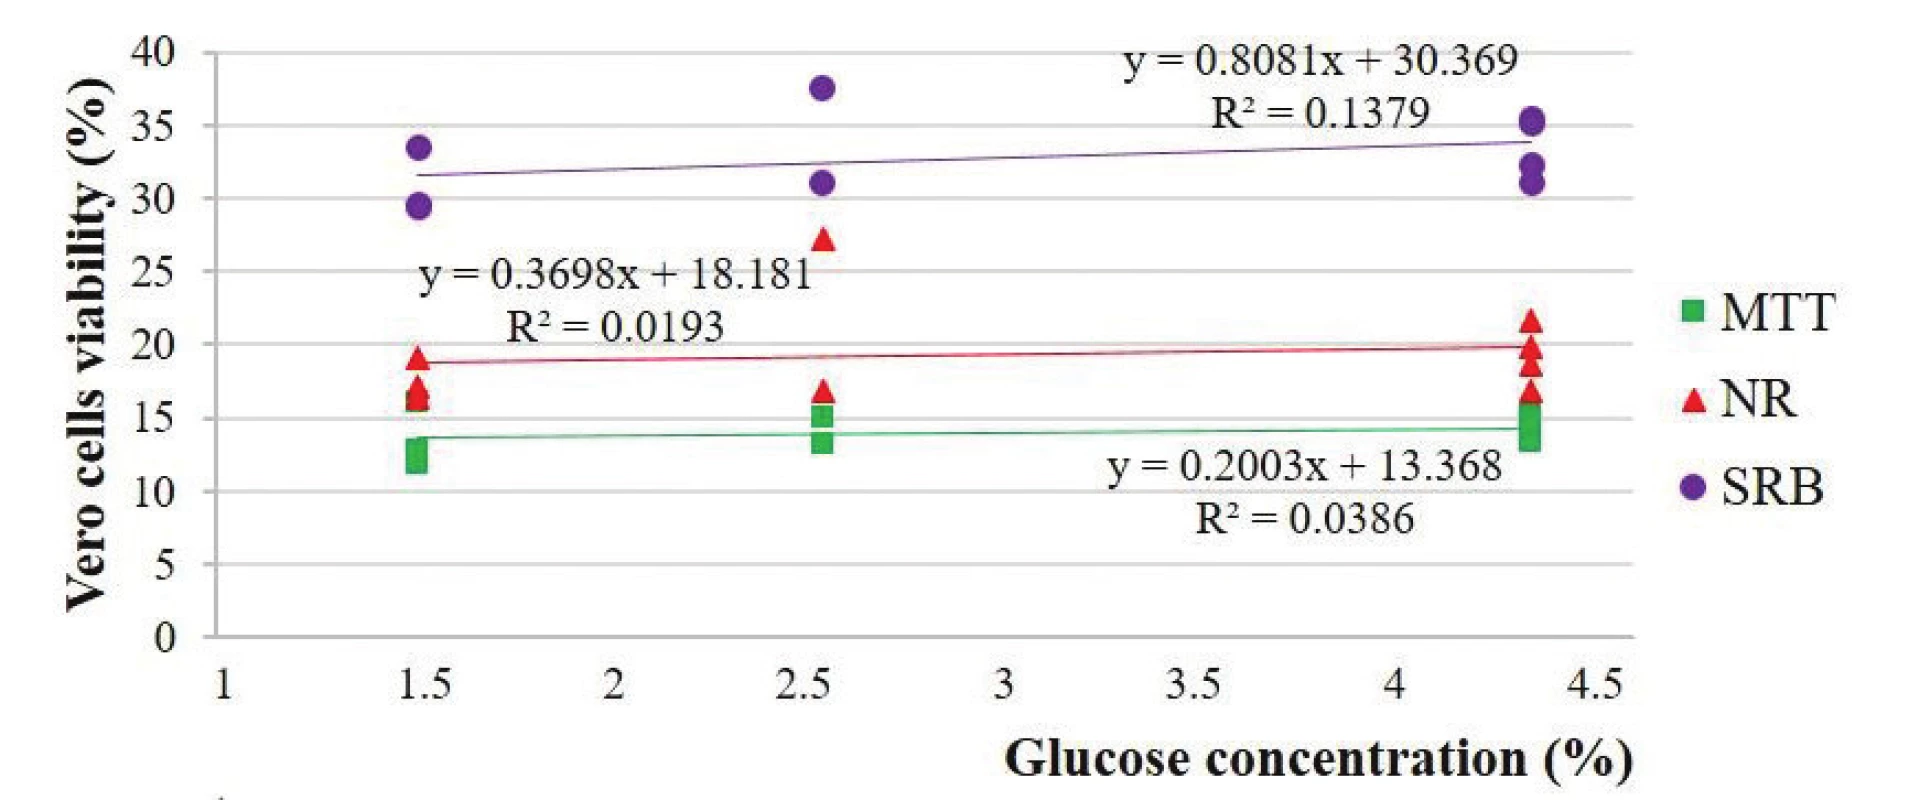 Estimation of Vero cells viability depending on the glucose concentration of the solutions